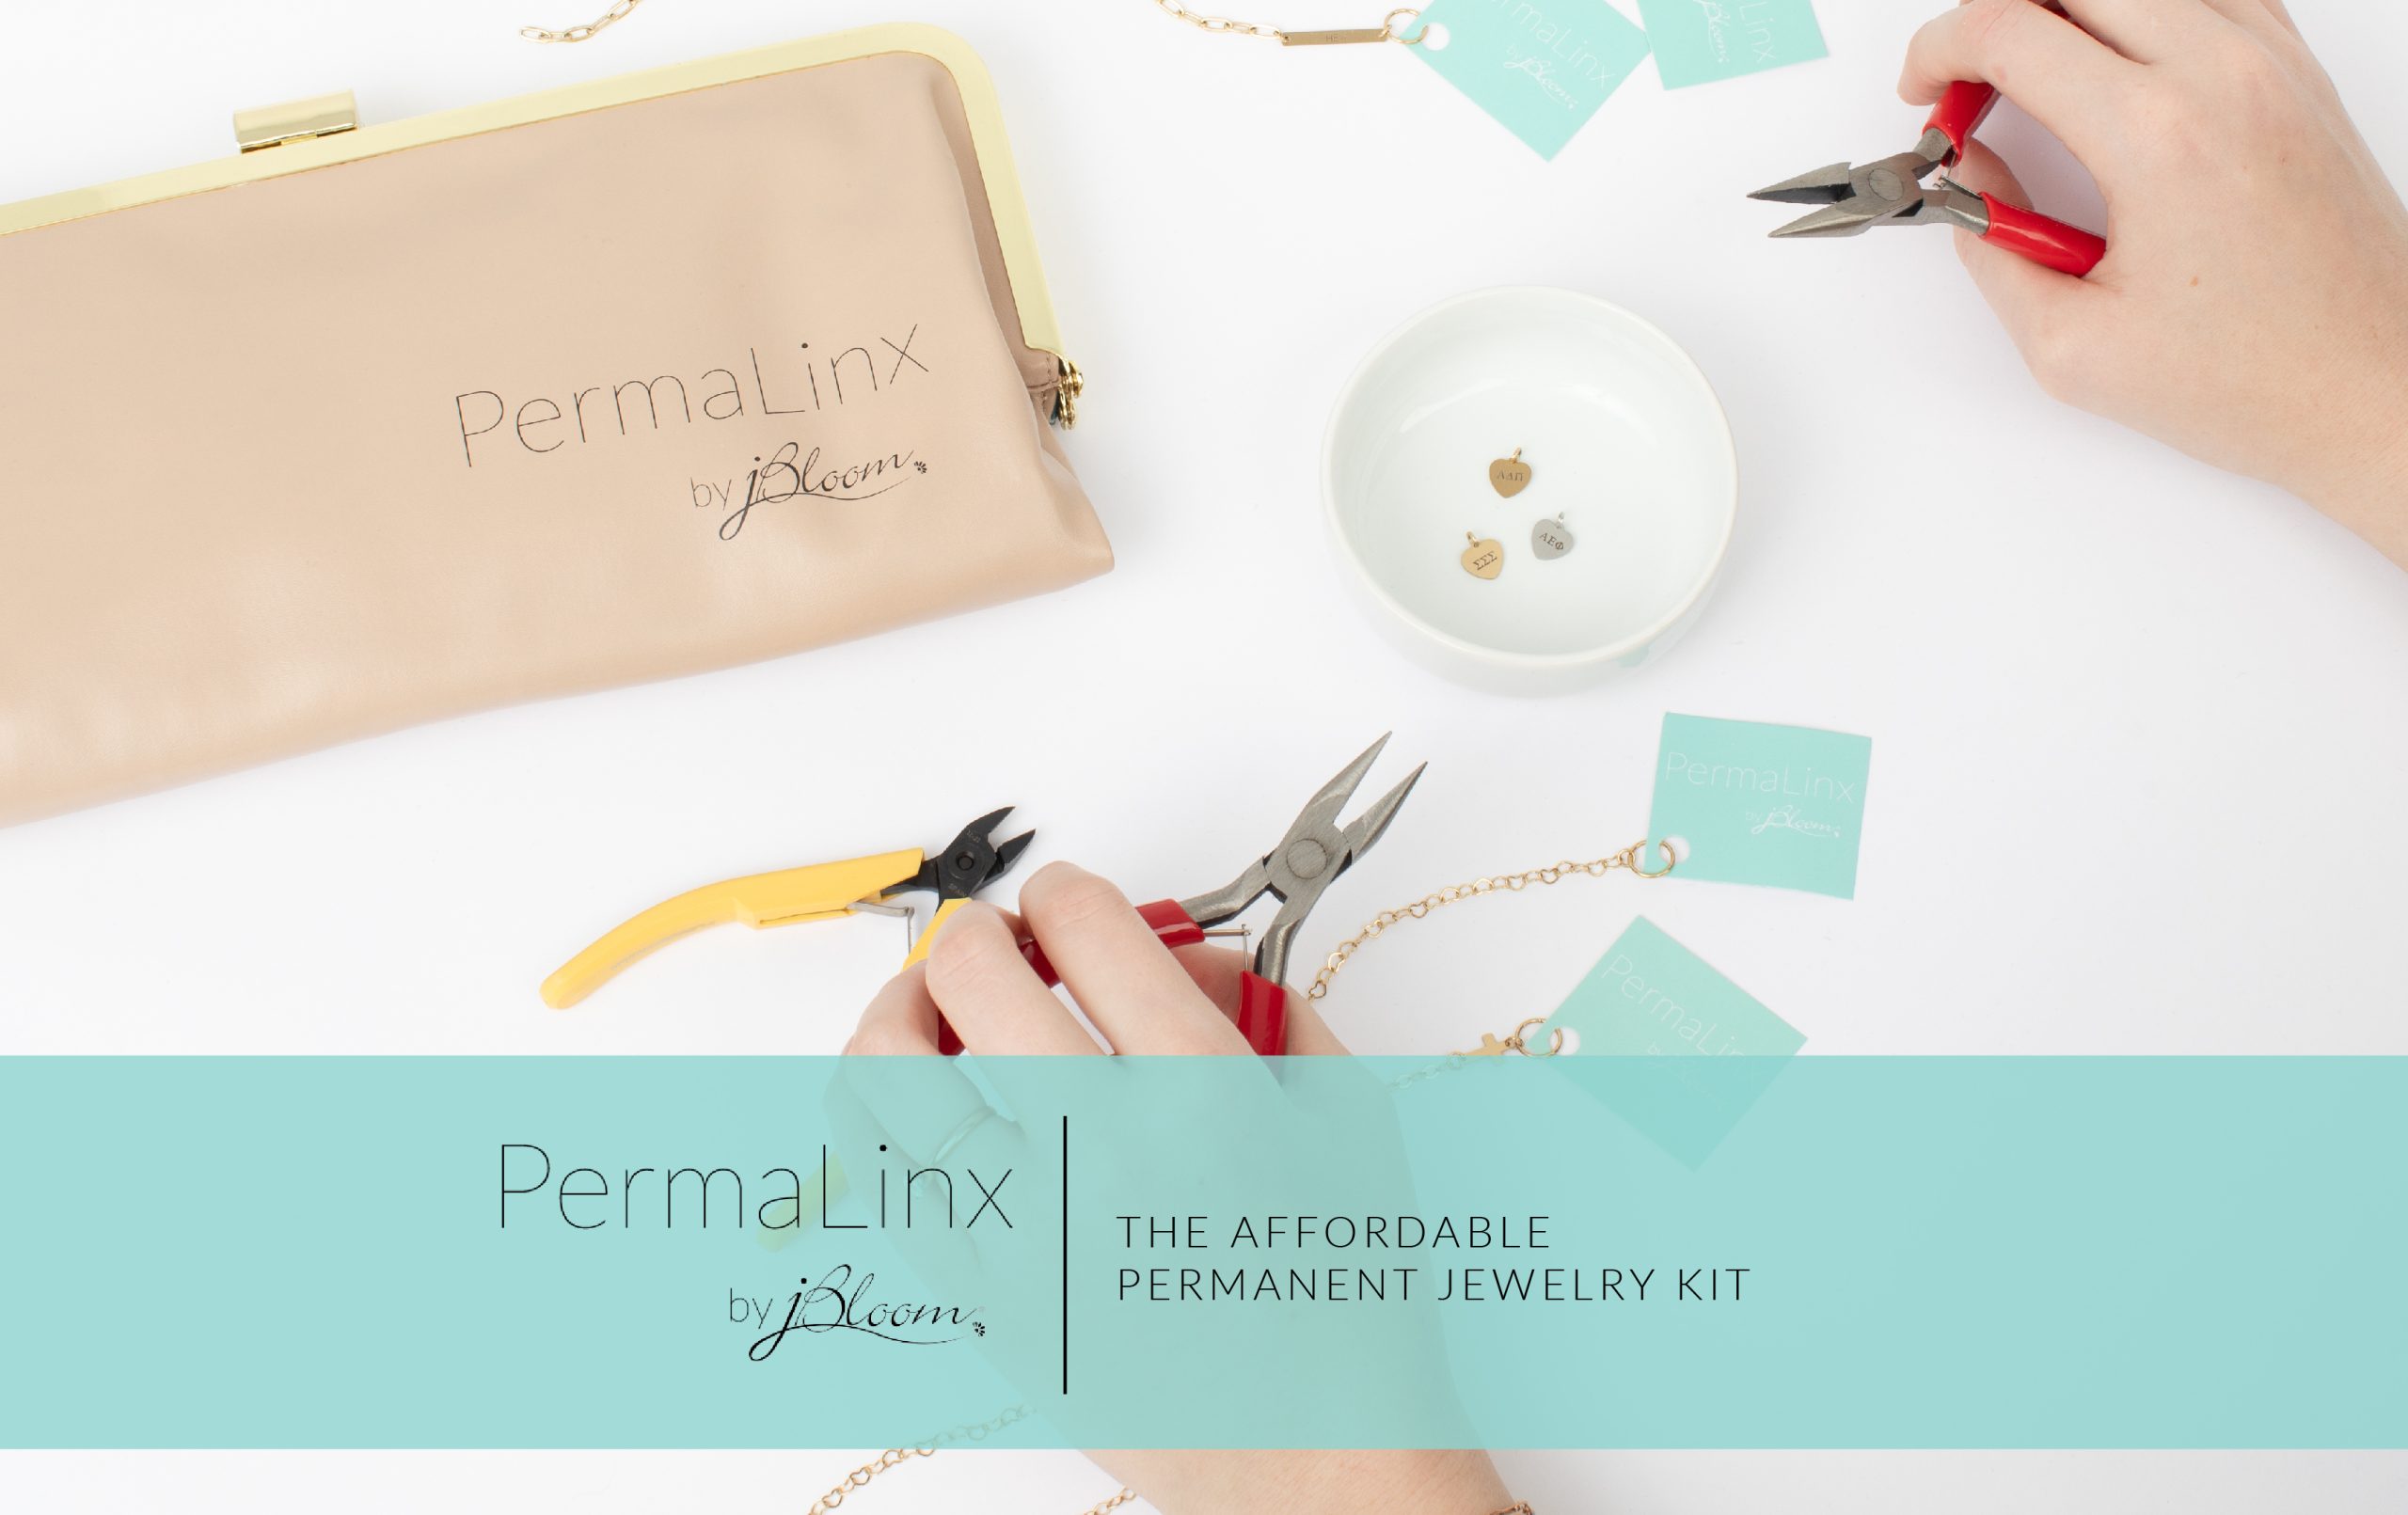 The Affordable Permanent Jewelry Kit